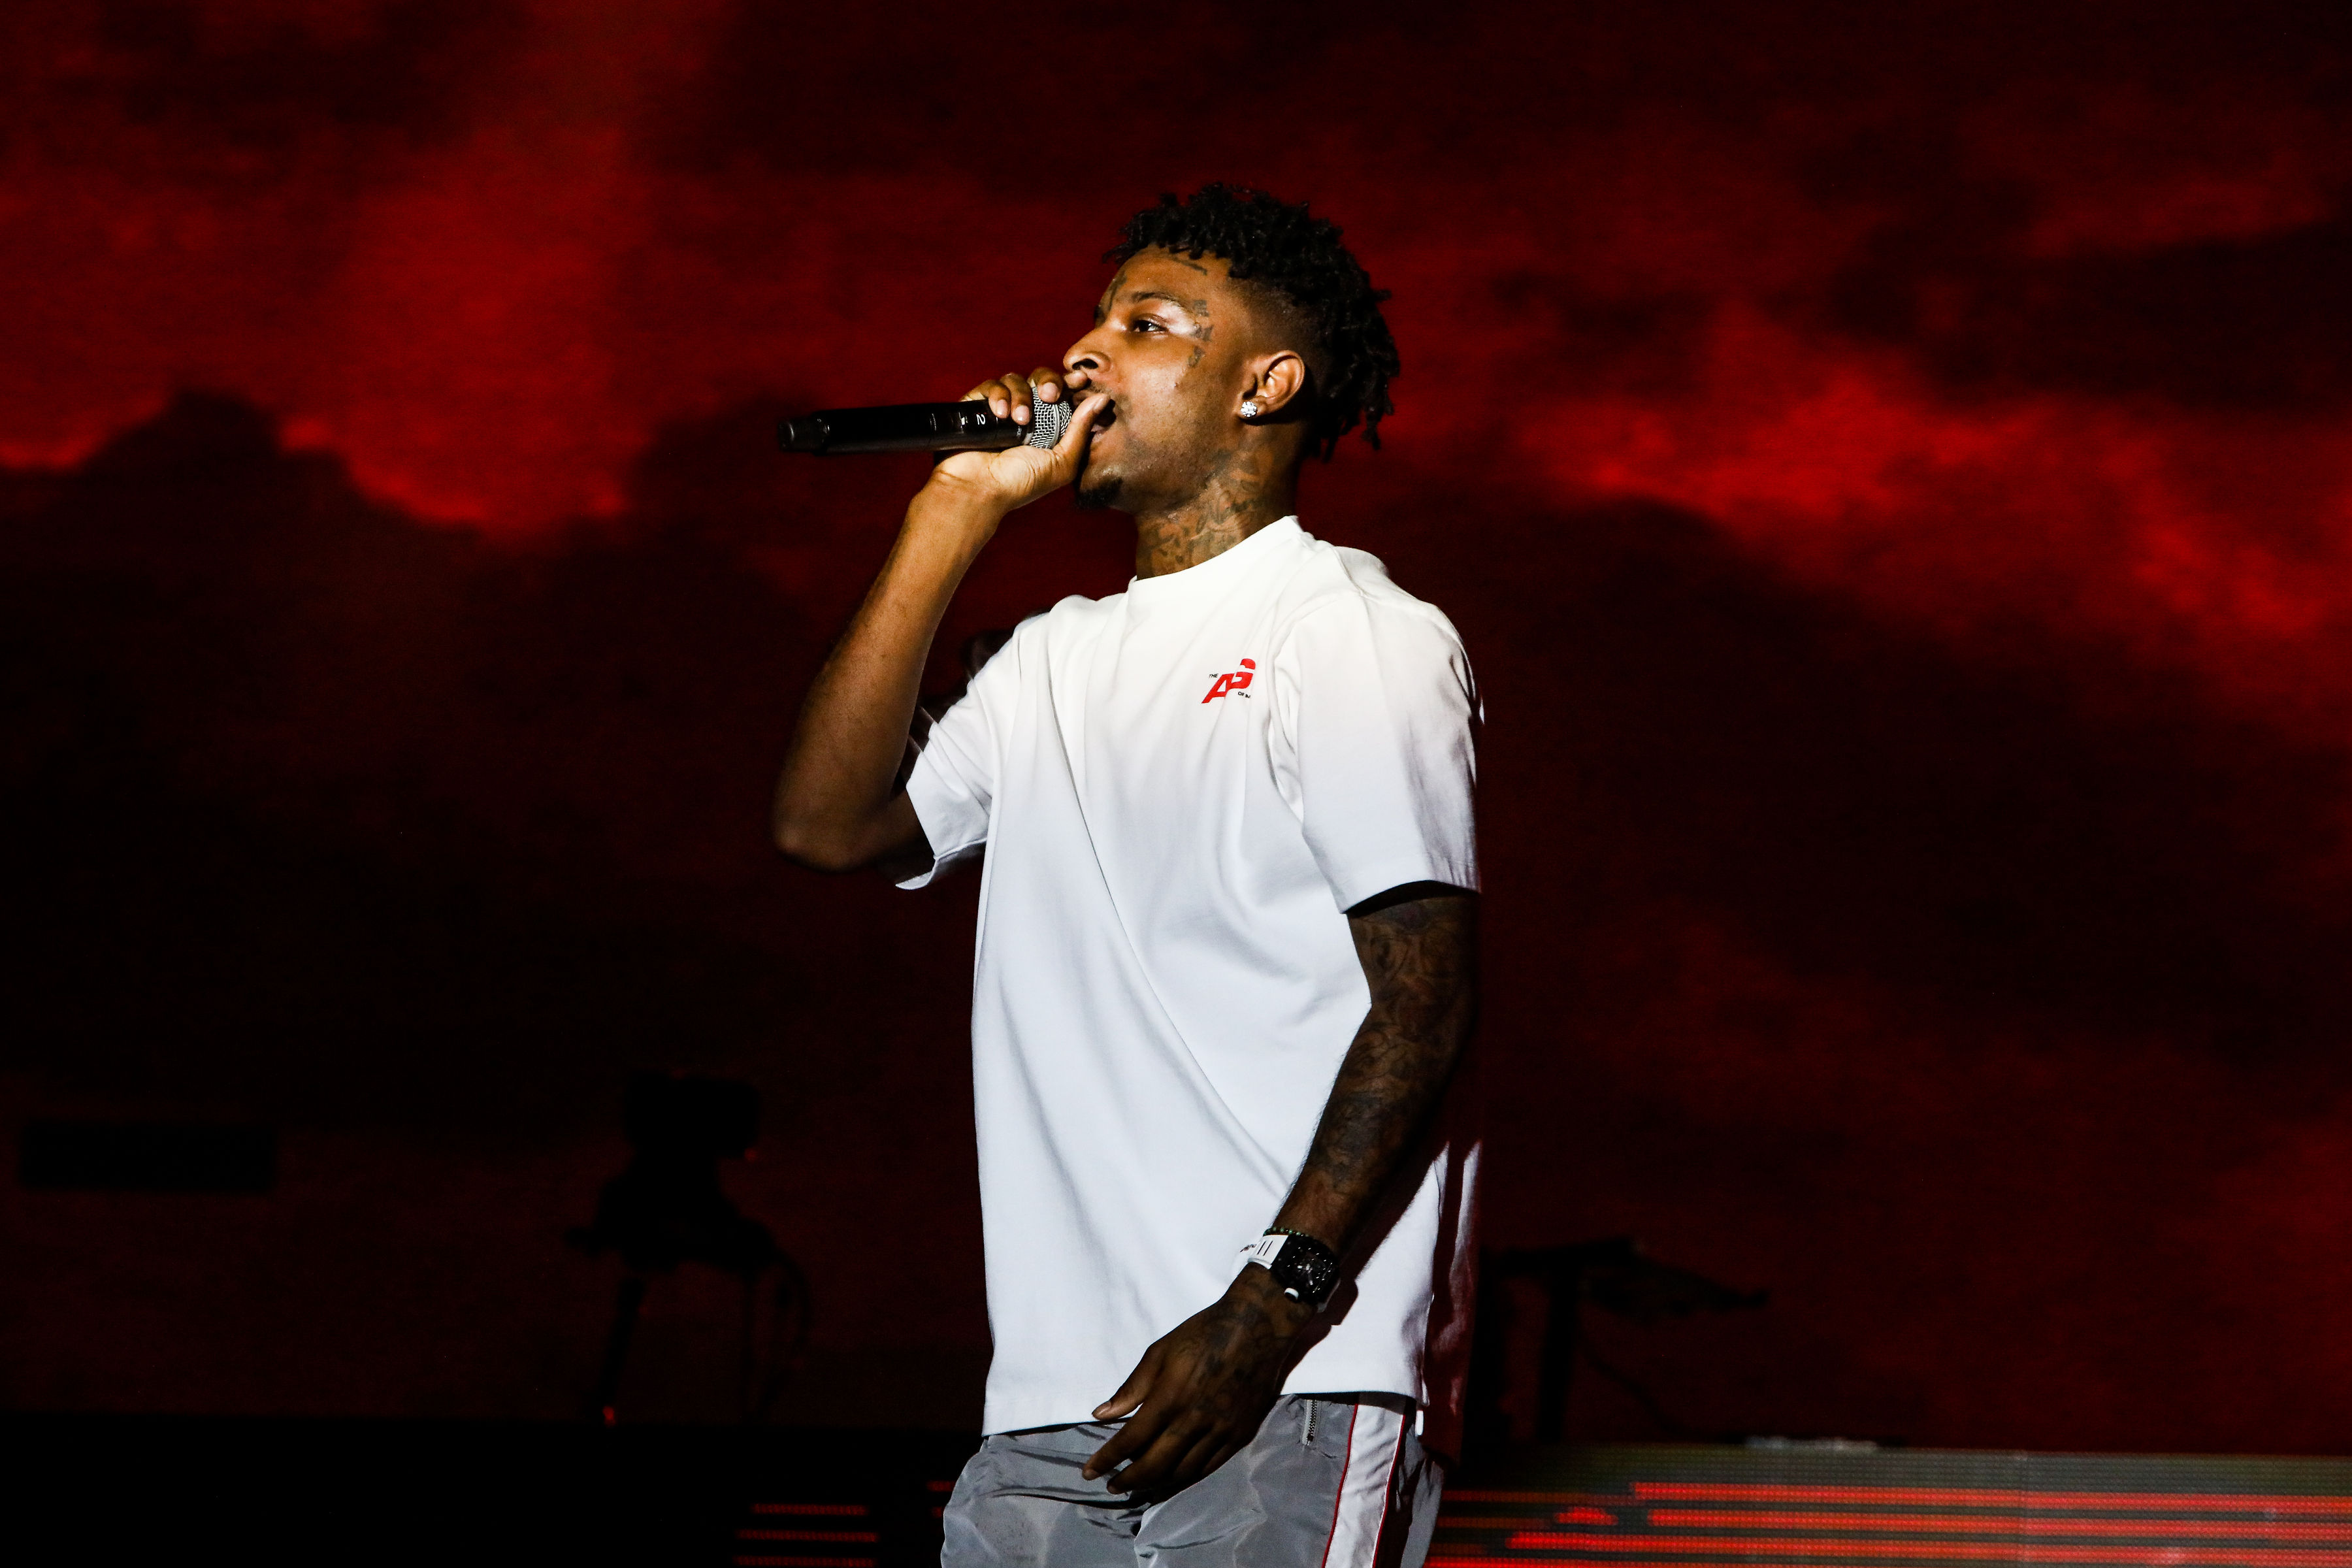 21 Savage Tweets He Will 'Never' Perform at Rolling Loud 'Ever Again